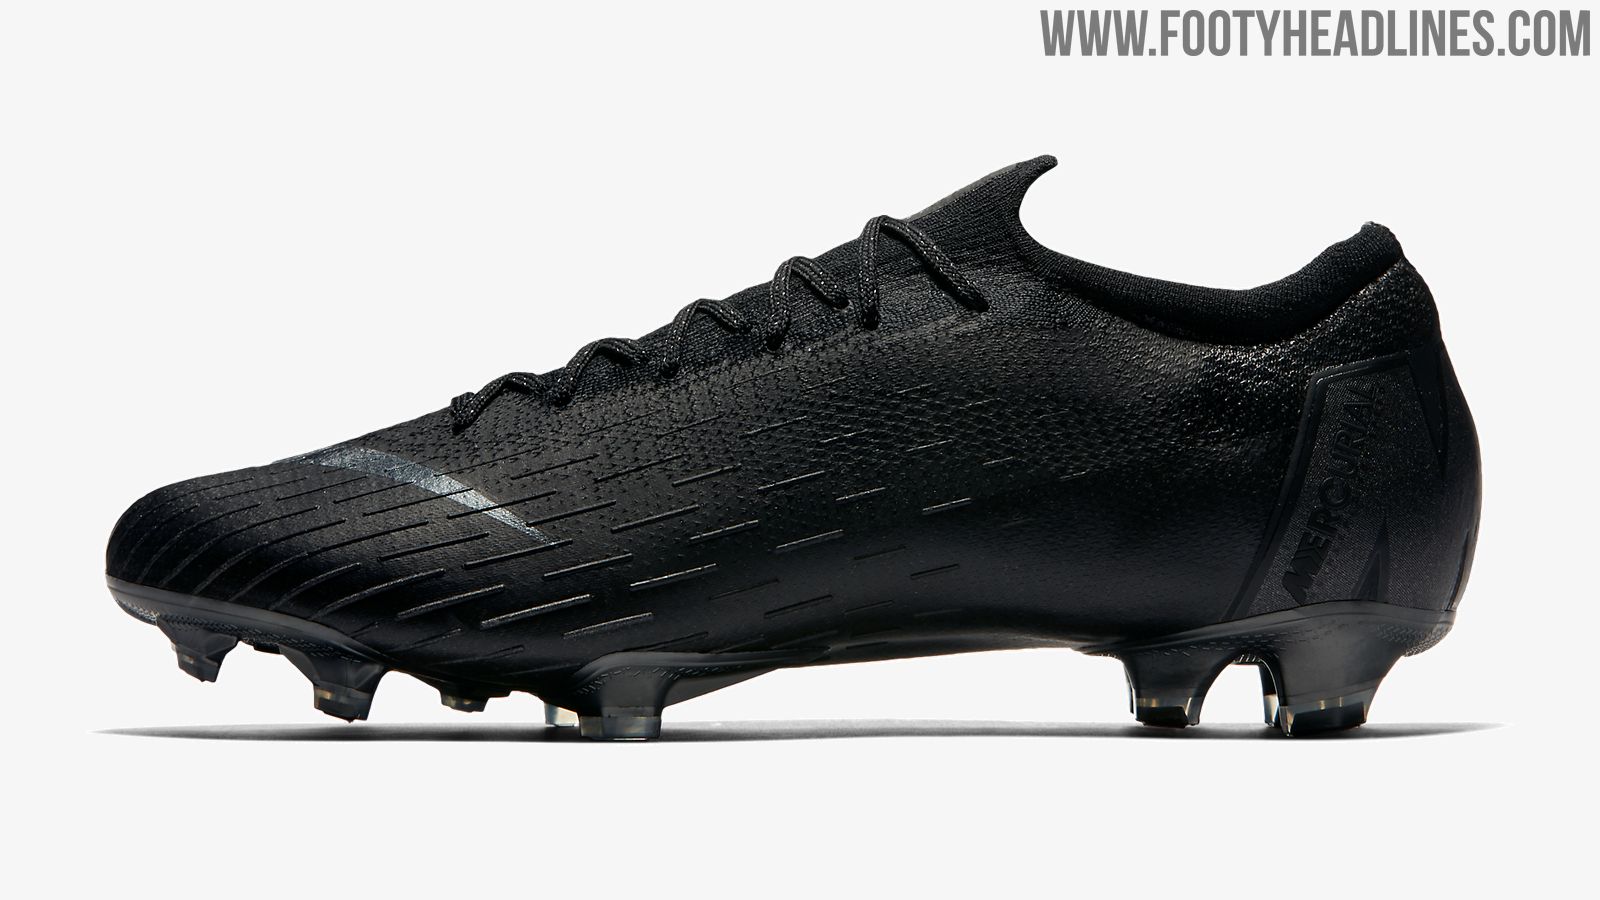 Nike Vapor 360 Stealth Ops Boots Released - Footy Headlines